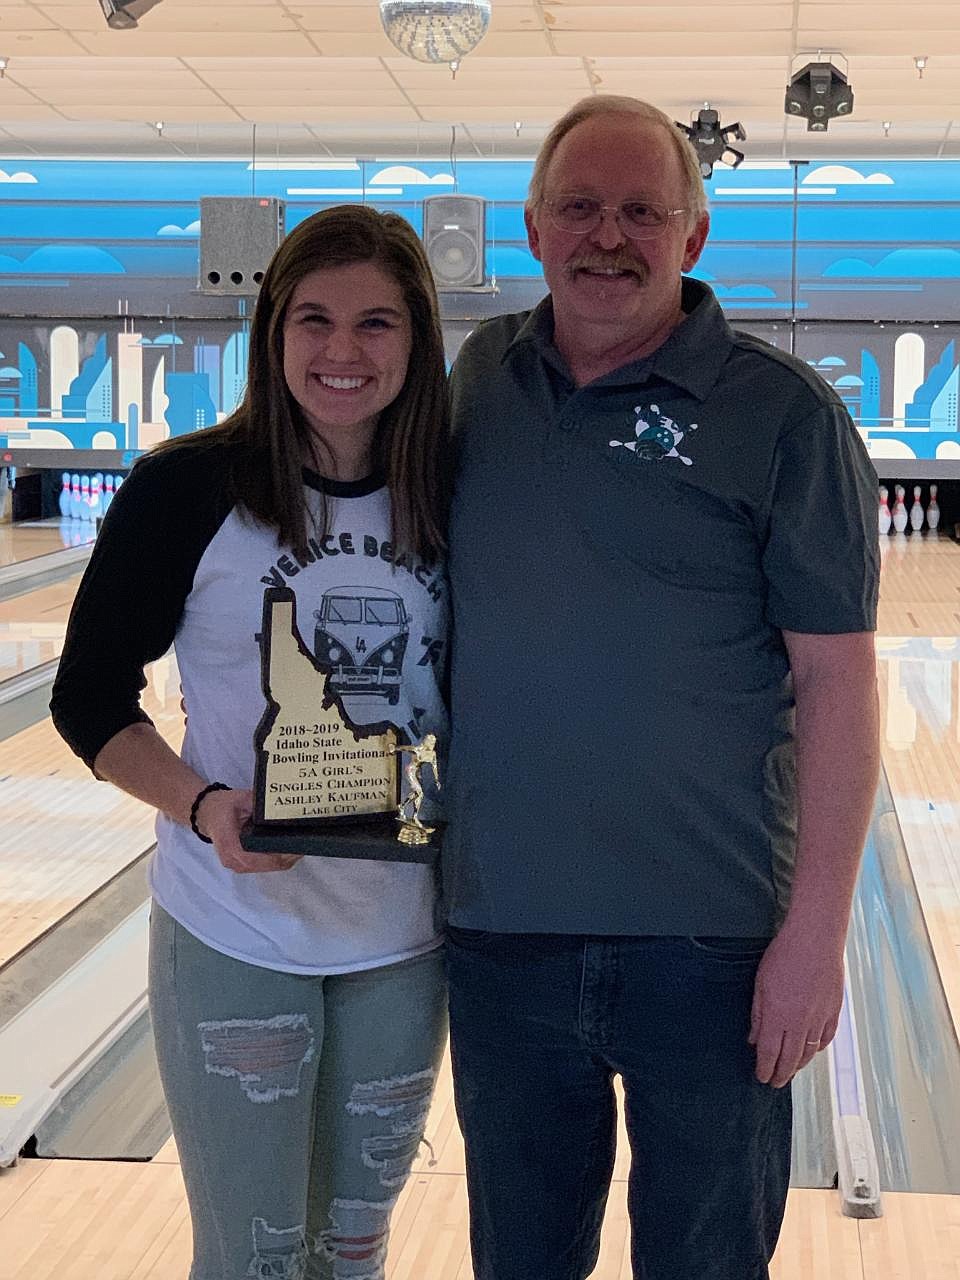 Courtesy photo
Ashley Kaufman, left, of Lake City qualified for state all four years of high school placing second her freshman year, third her sophomore year, second her junior year, and now first her senior year. At right is LCHS coach Ron Jacobson.